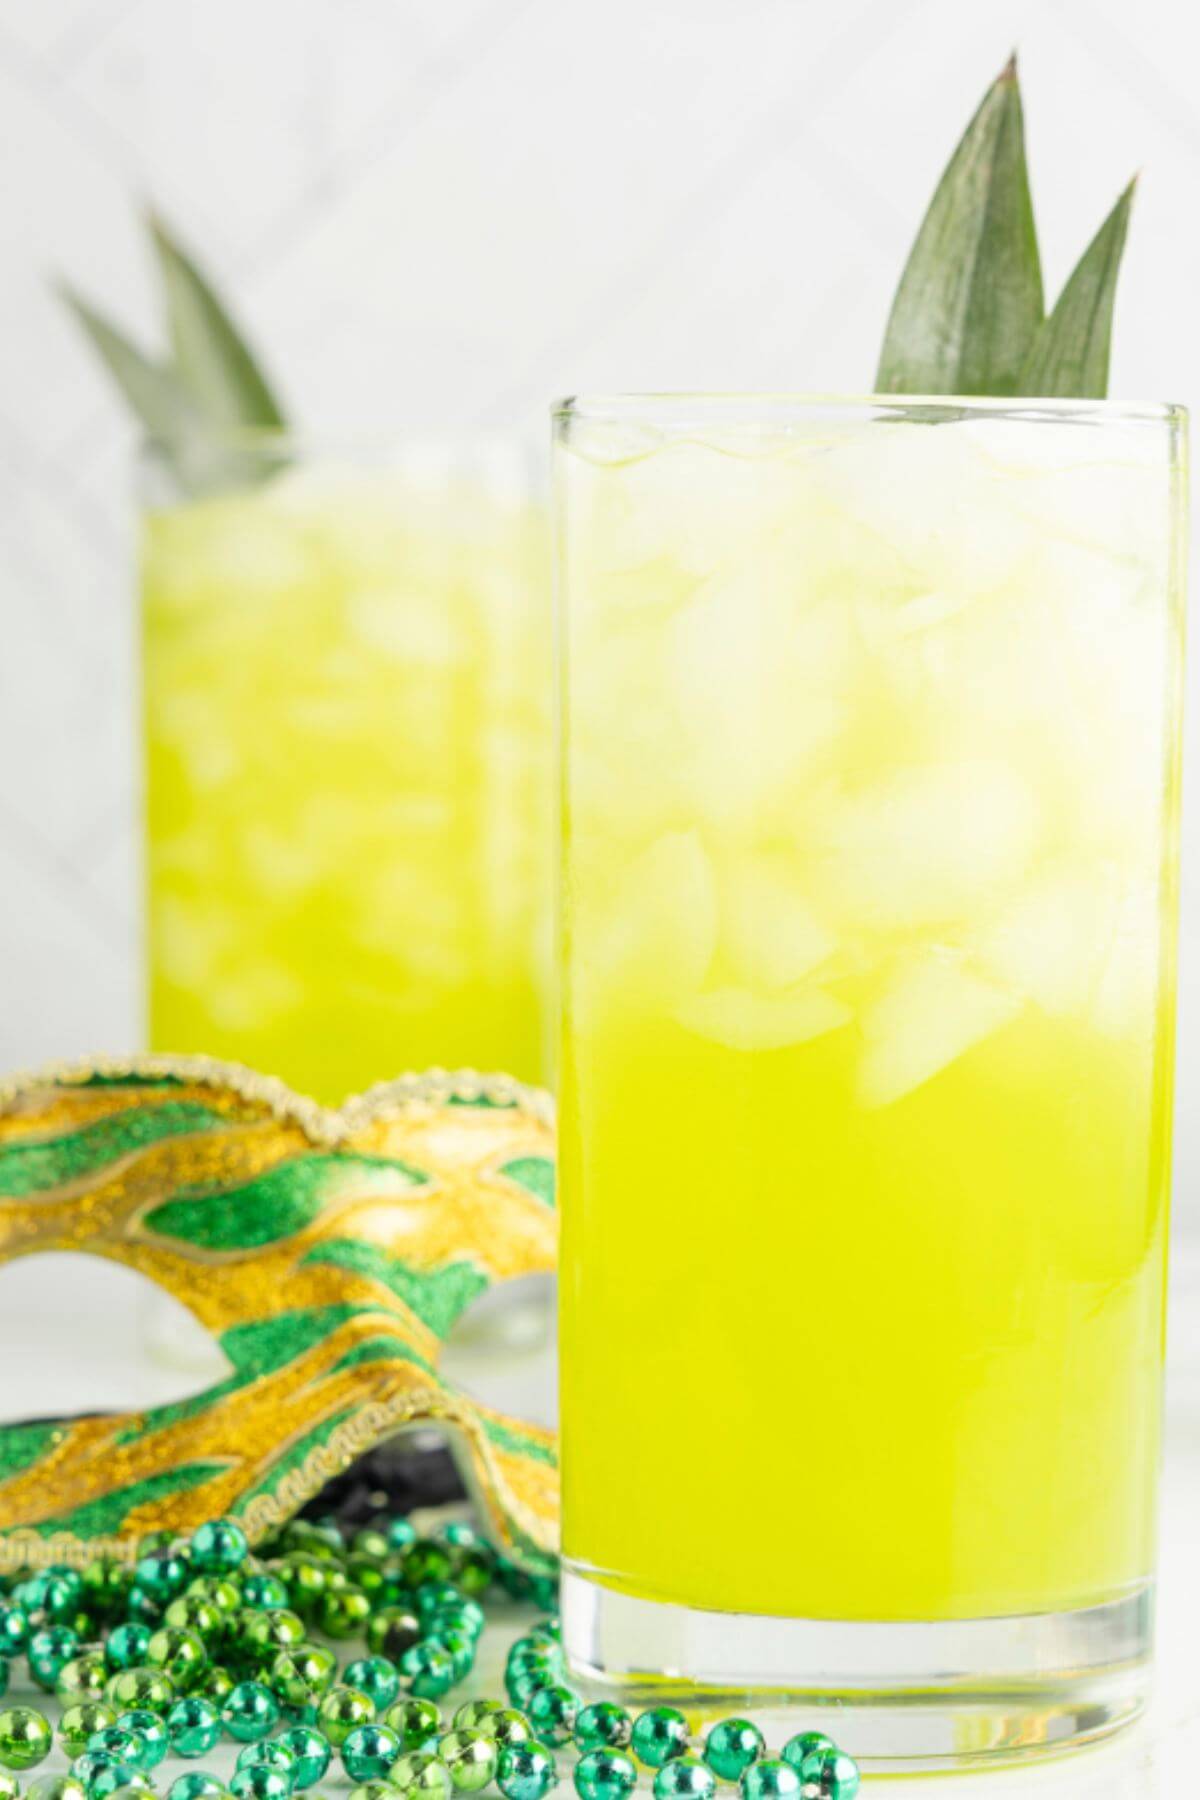 Two yellow cocktails with leaf garnish are next to green and gold mask and beads.